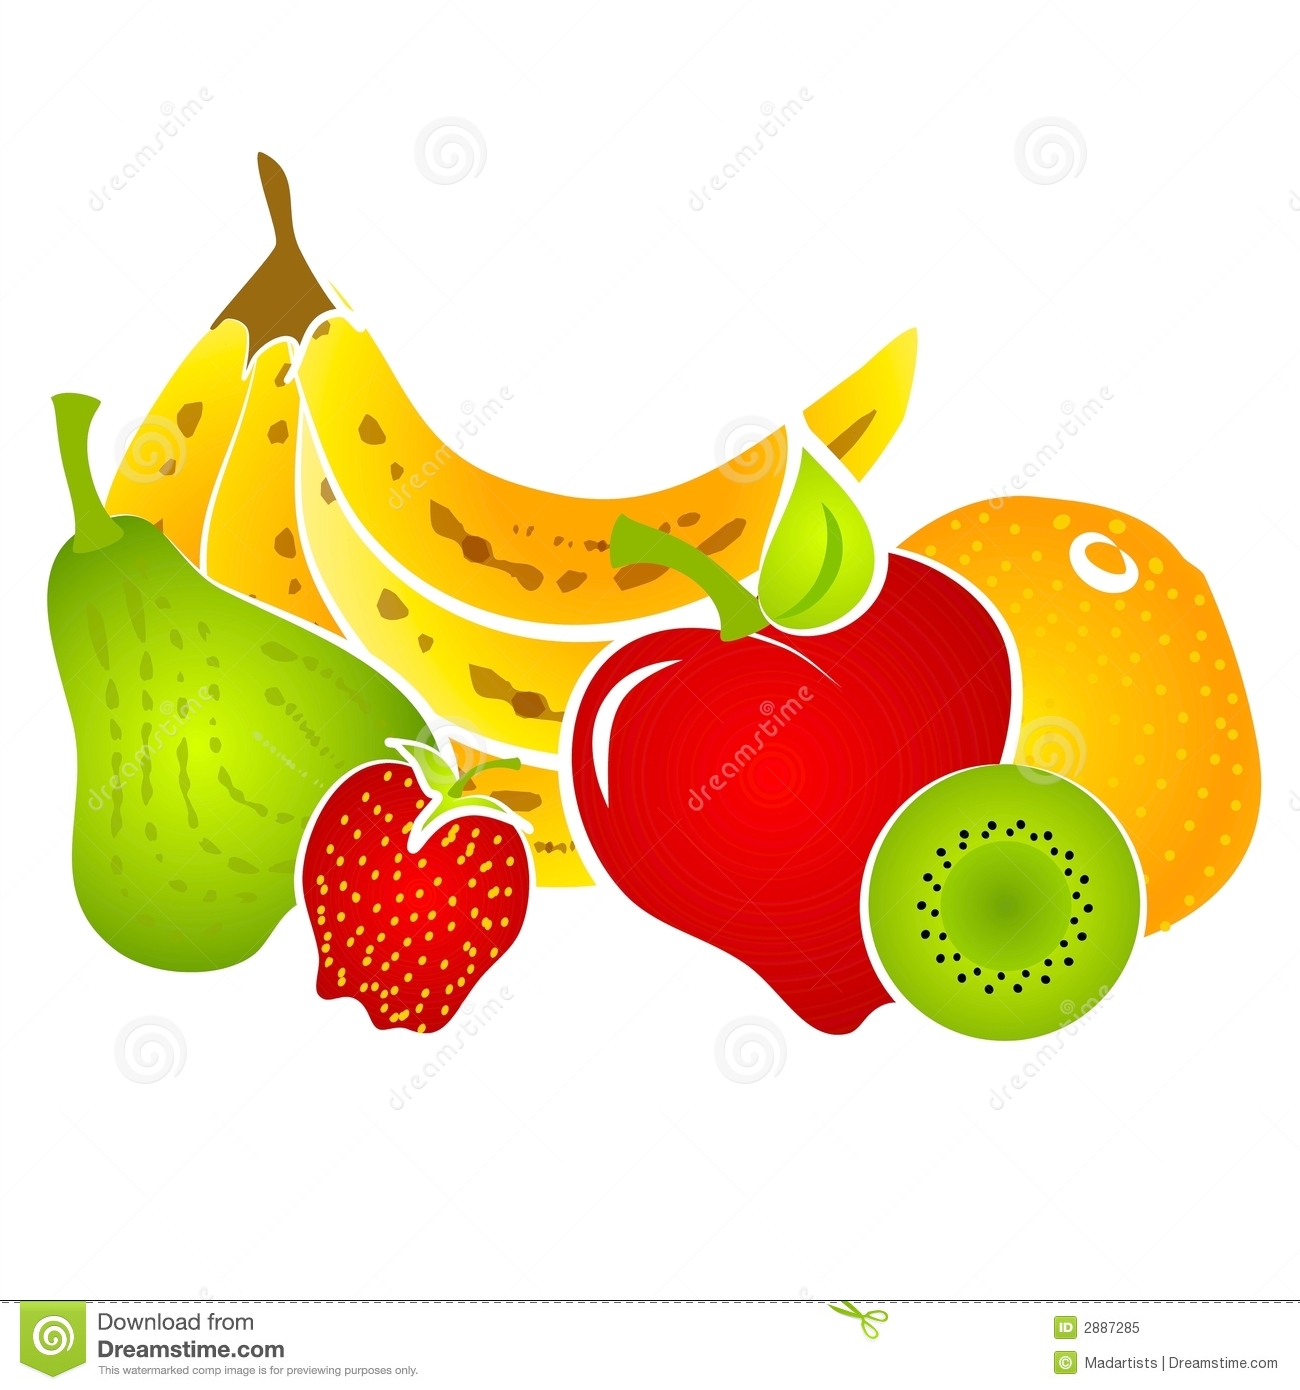 Healthy Snack Clipart Images   Pictures   Becuo